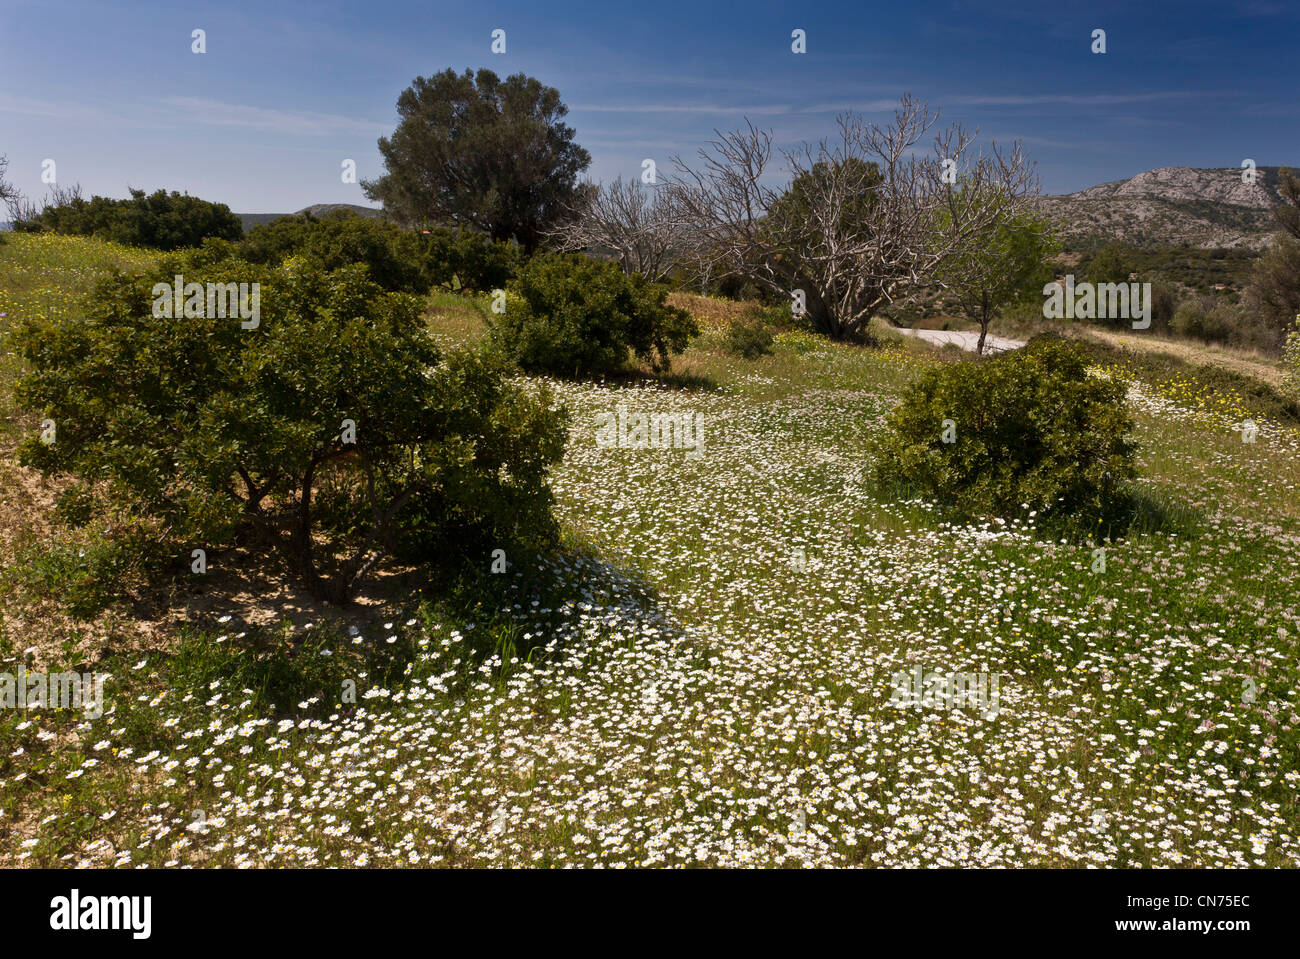 Young Mastic trees, Pistacia lentiscus var chia in flowery plantation in spring; on Chios, Greece. Stock Photo